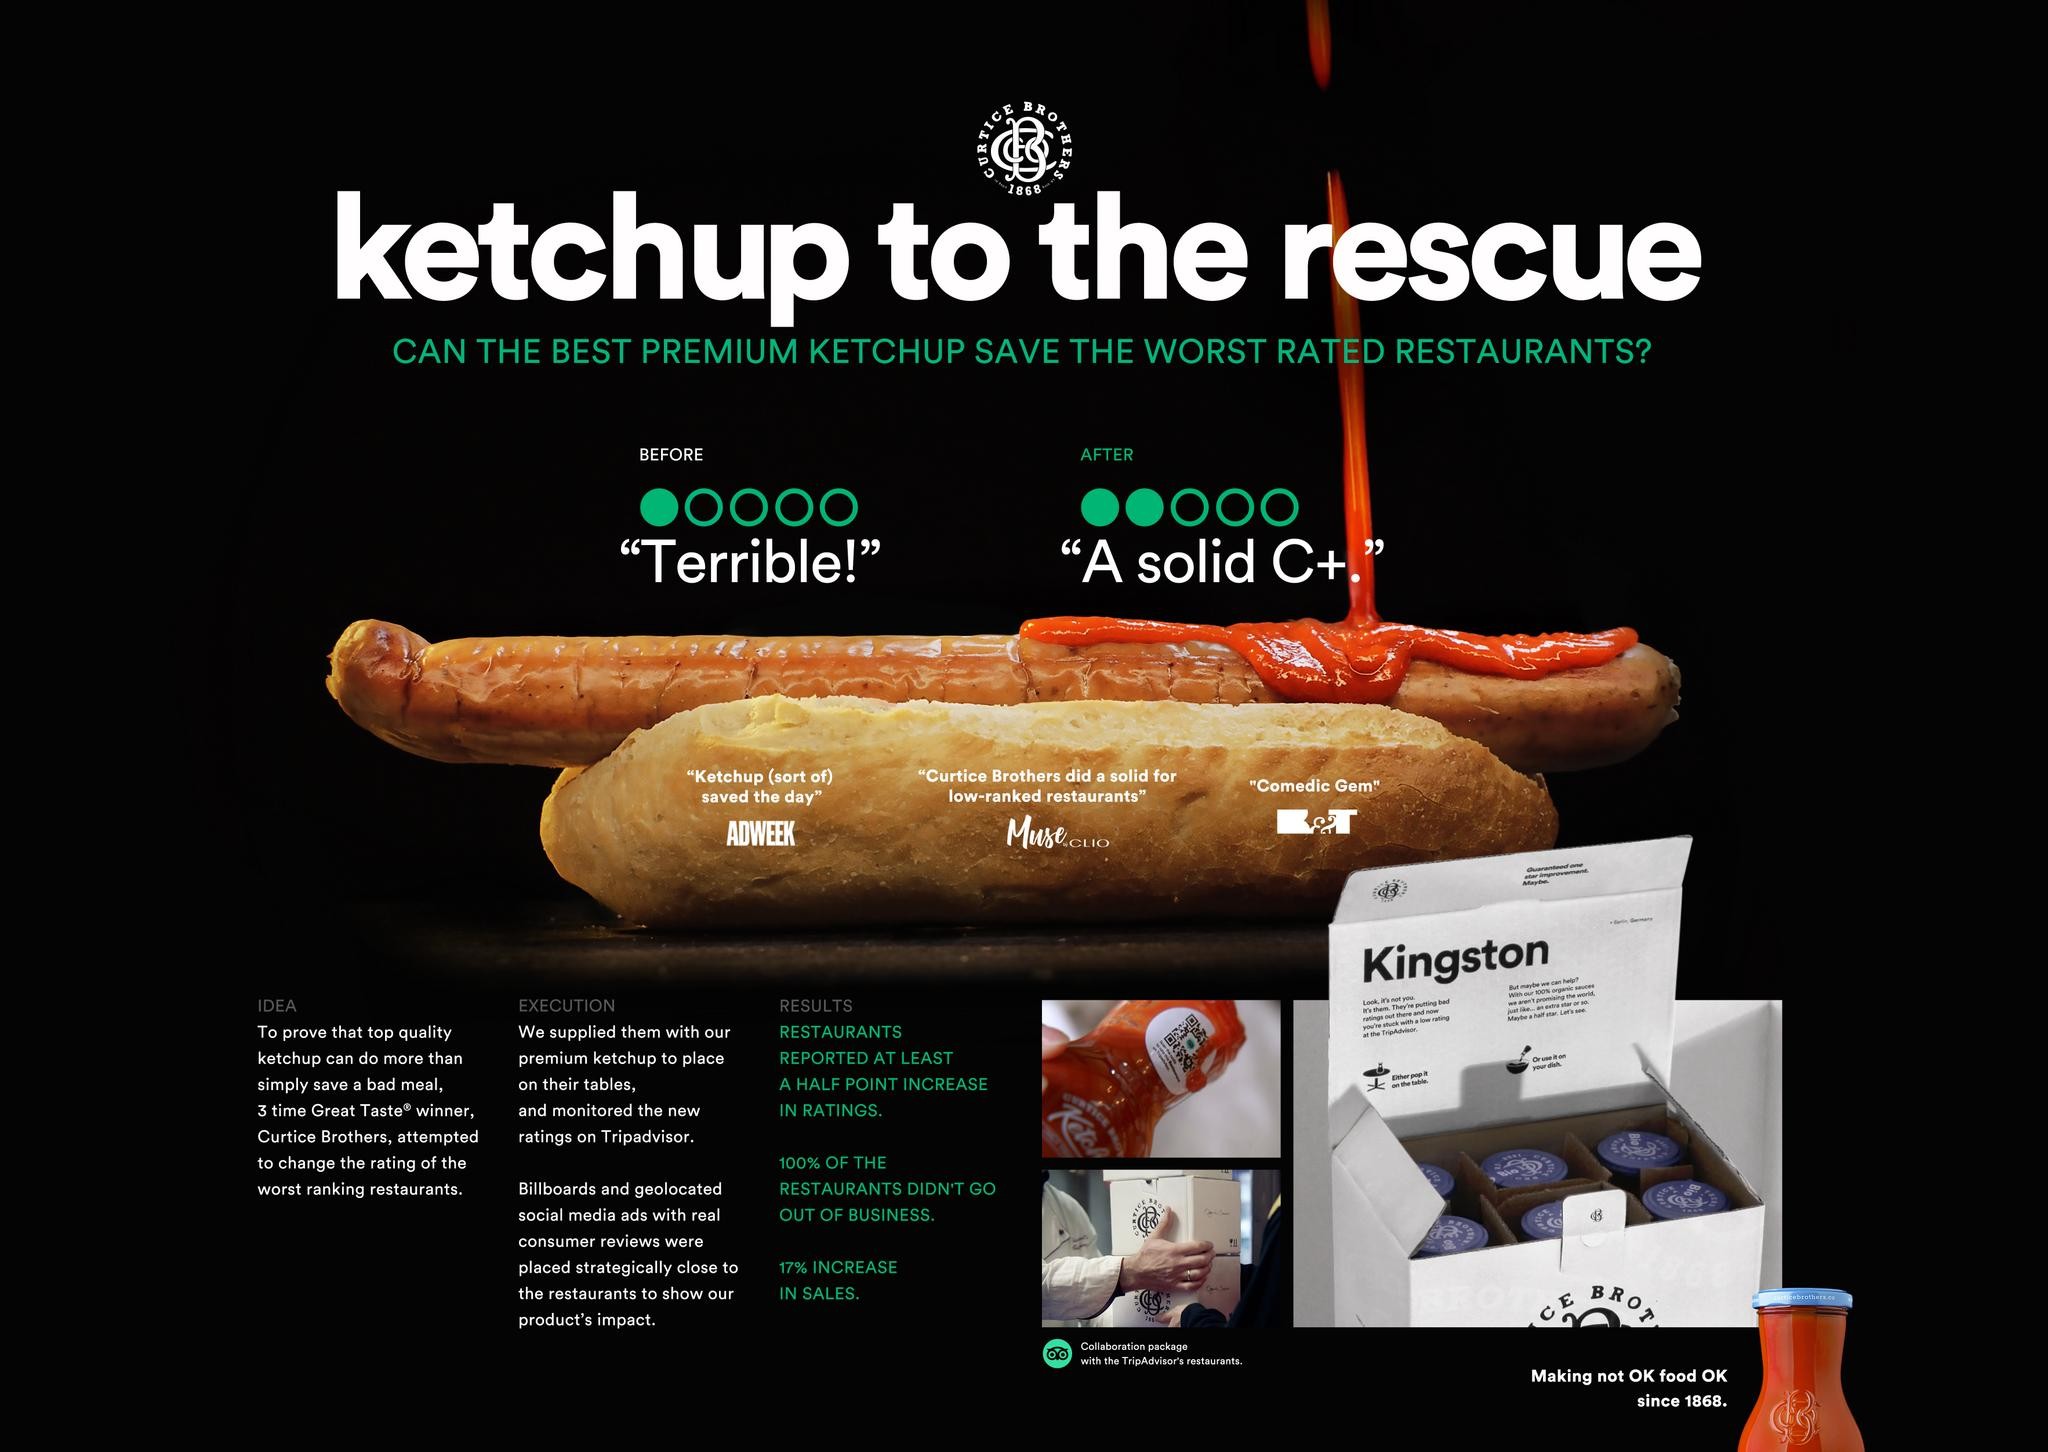 KETCHUP TO THE RESCUE